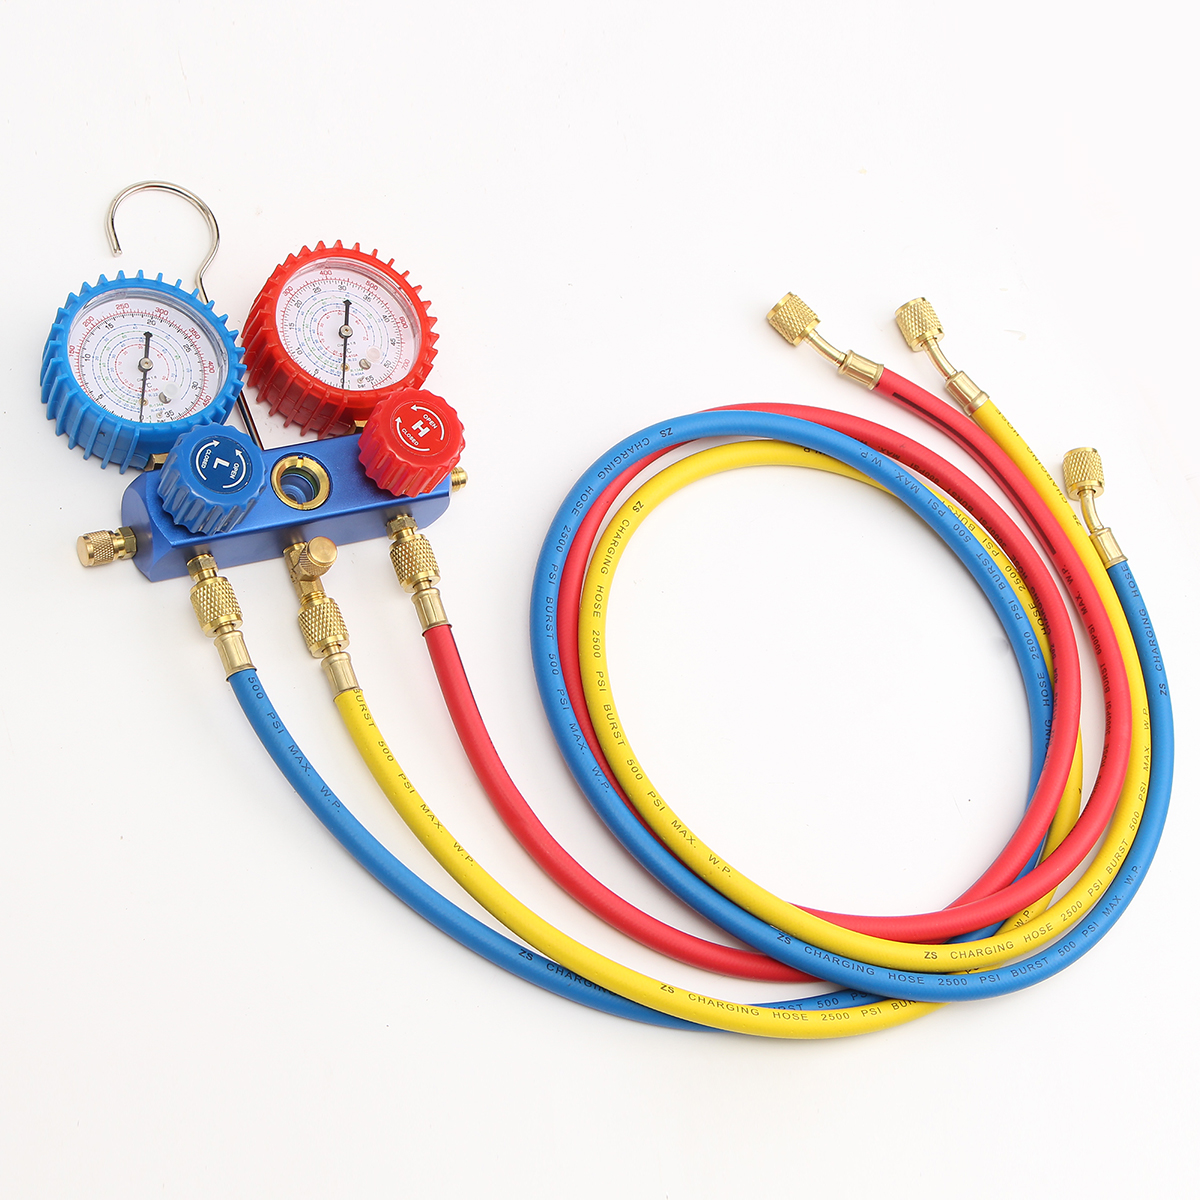 AC-Refrigerant-Manifold-Gauge-Set-Air-Conditioning-Tools-with-Hose-and-Hook-for-Air-Condition-1545648-4